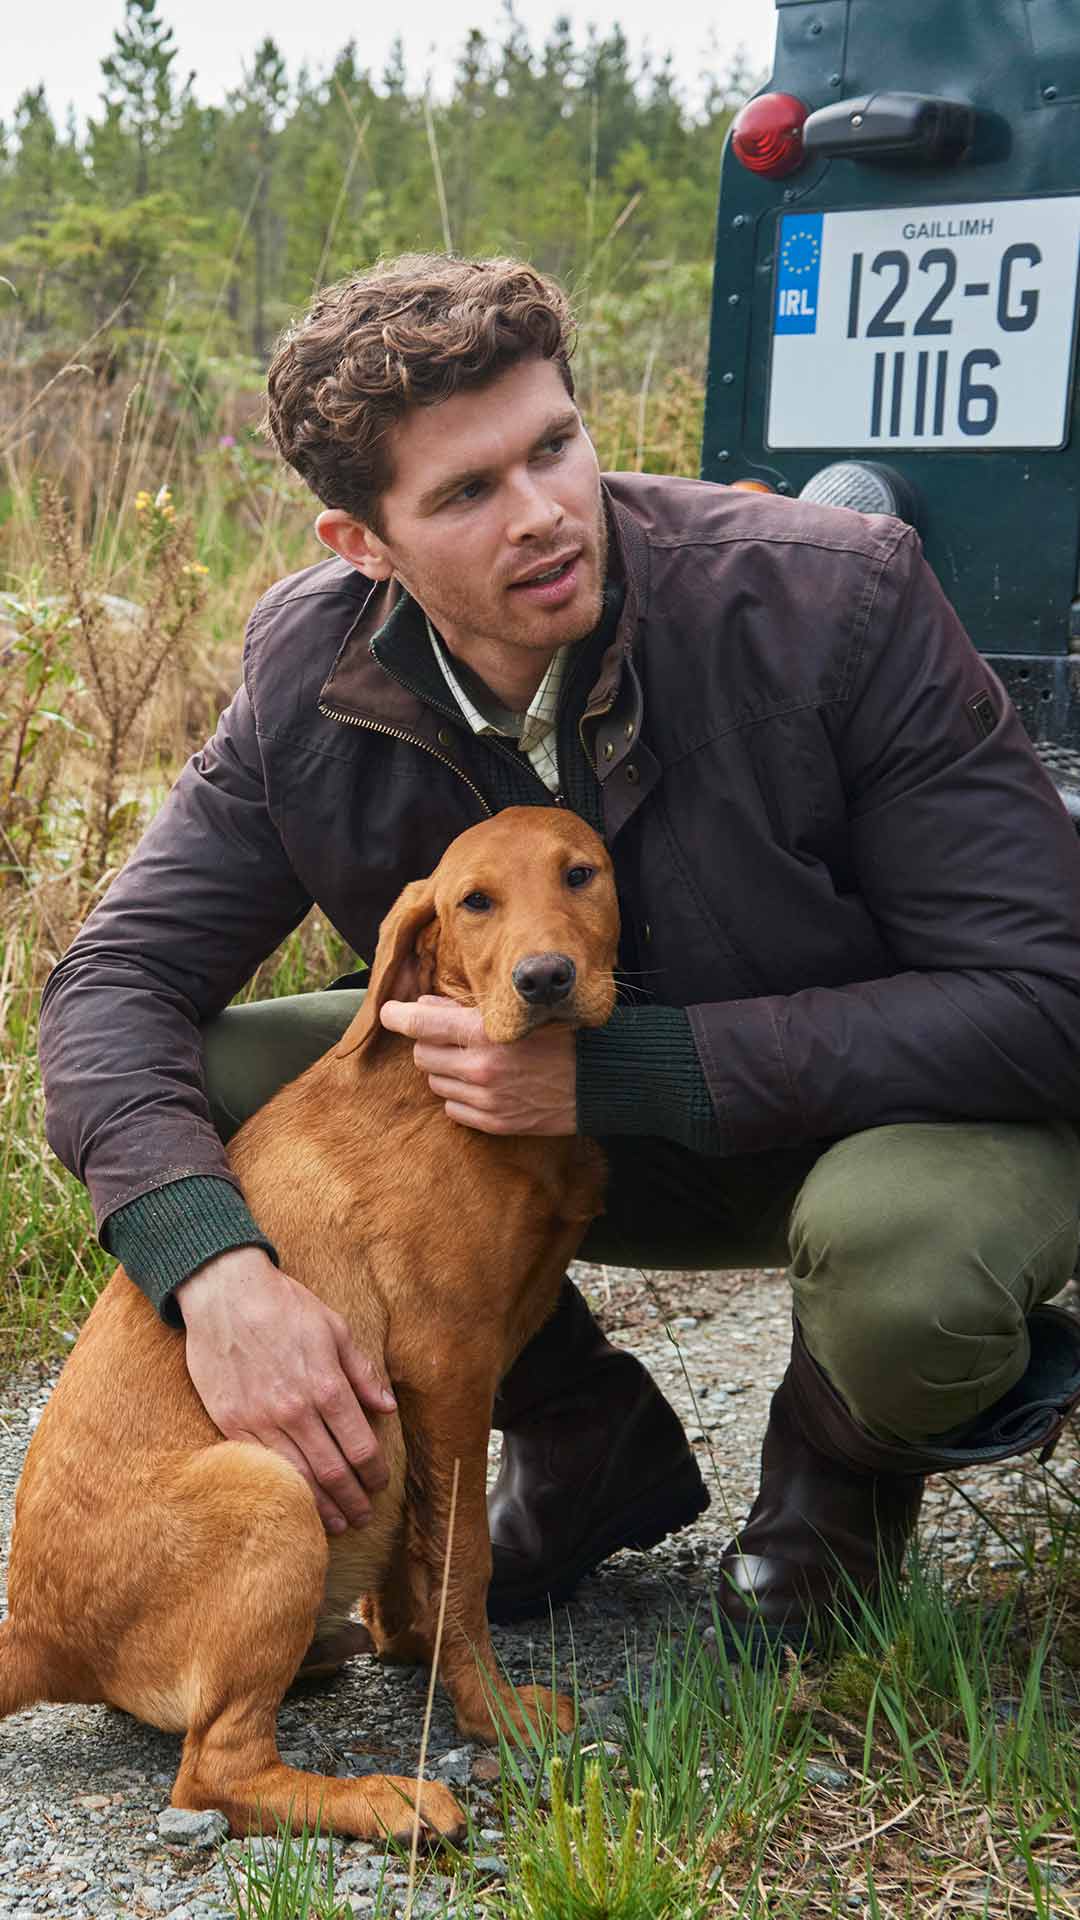 Man in dark brown waxed jacket petting a brown dog behind a Land Rover Defender.